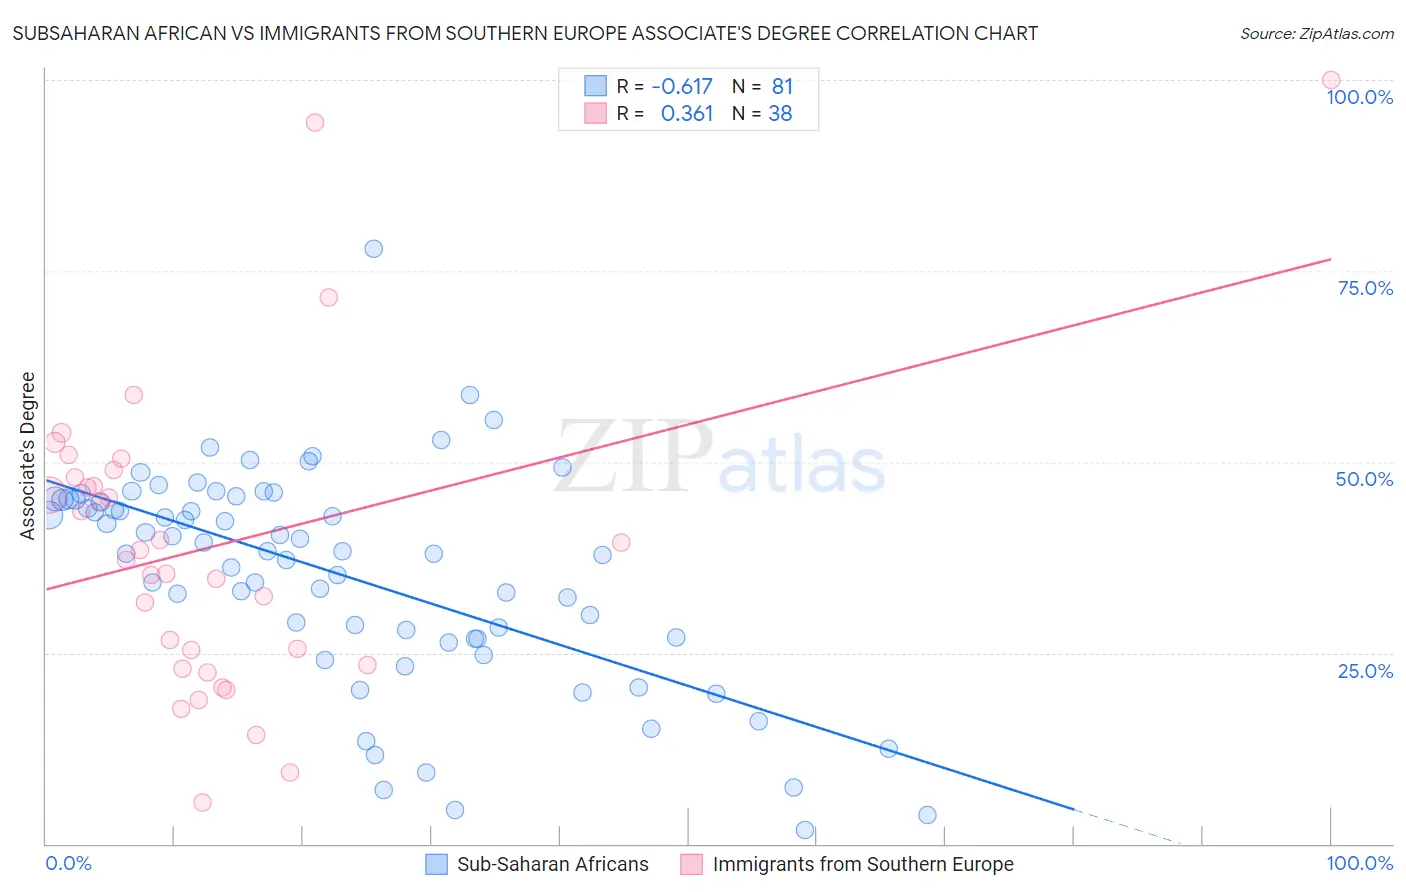 Subsaharan African vs Immigrants from Southern Europe Associate's Degree